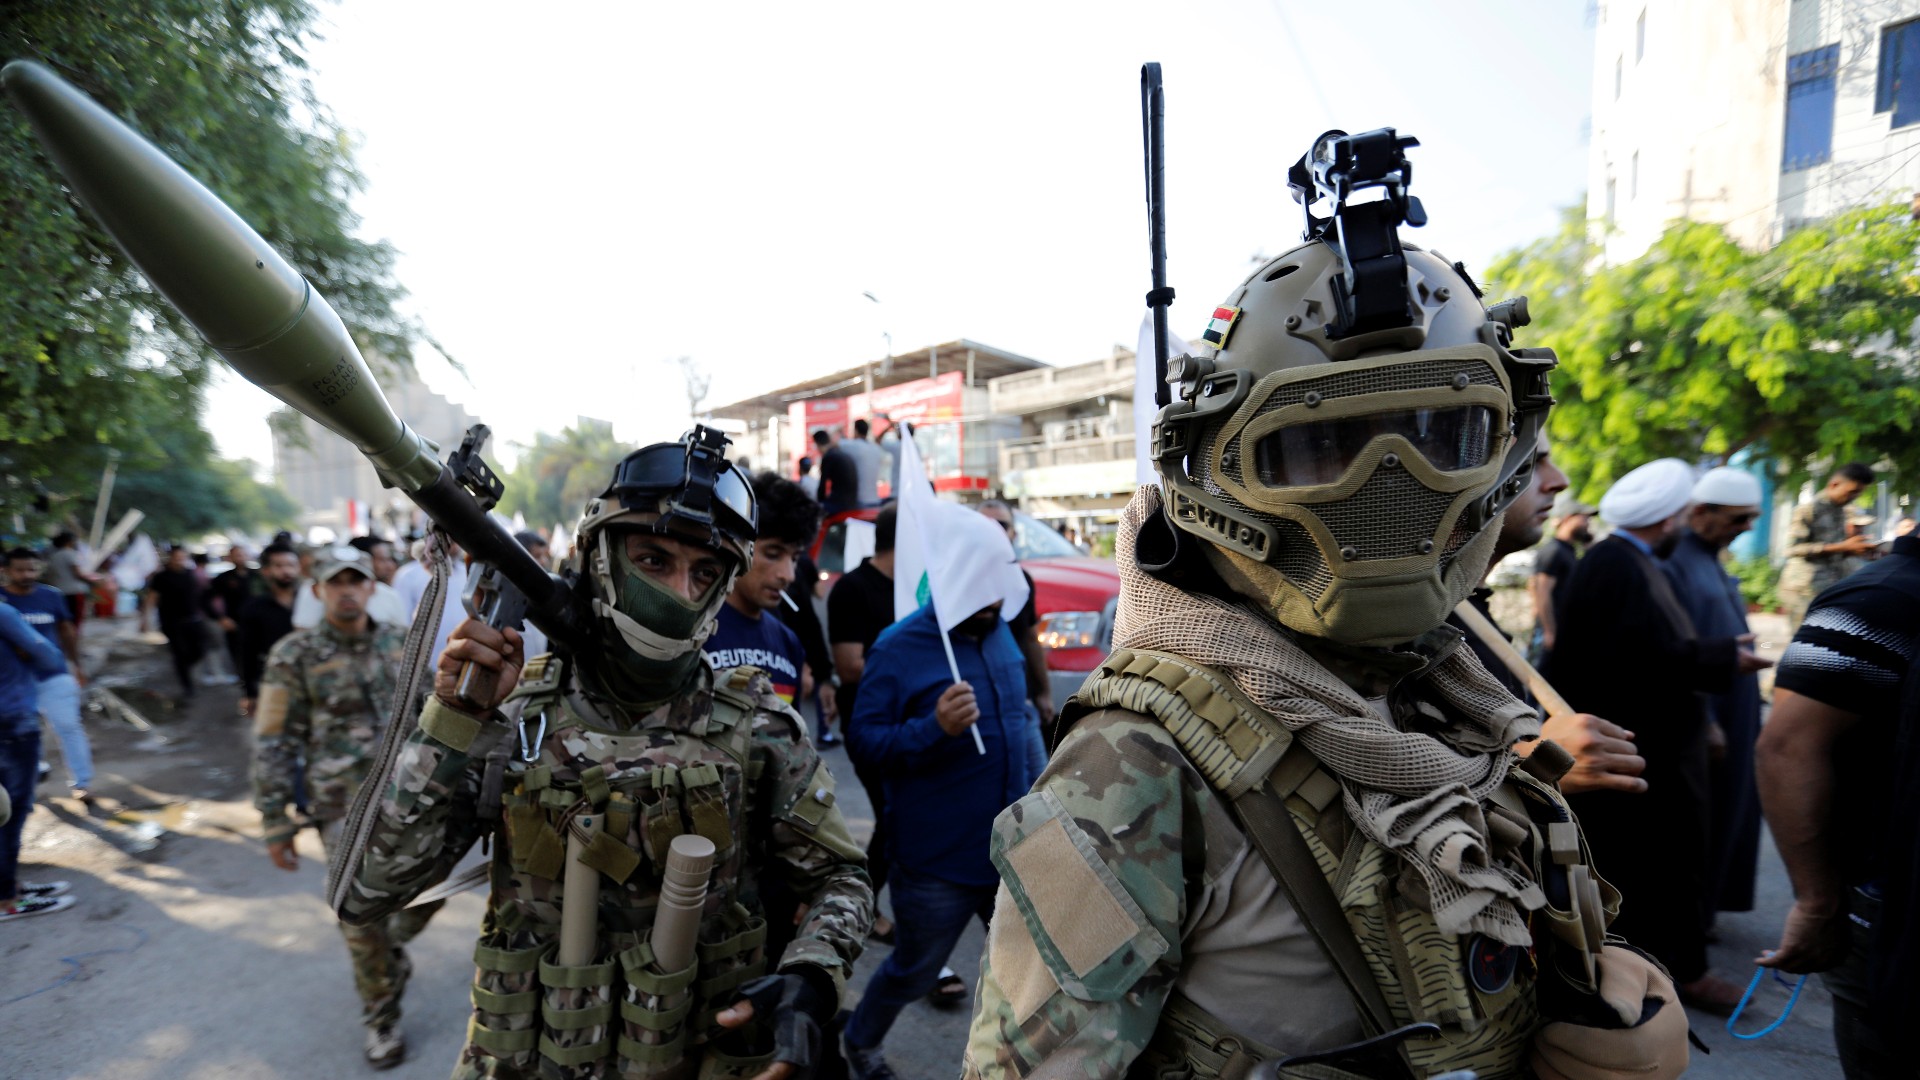 Iraqi Popular Mobilisation Forces (Hashd al-Shaabi) are seen at a march in Baghdad in 2019 (Reuters)